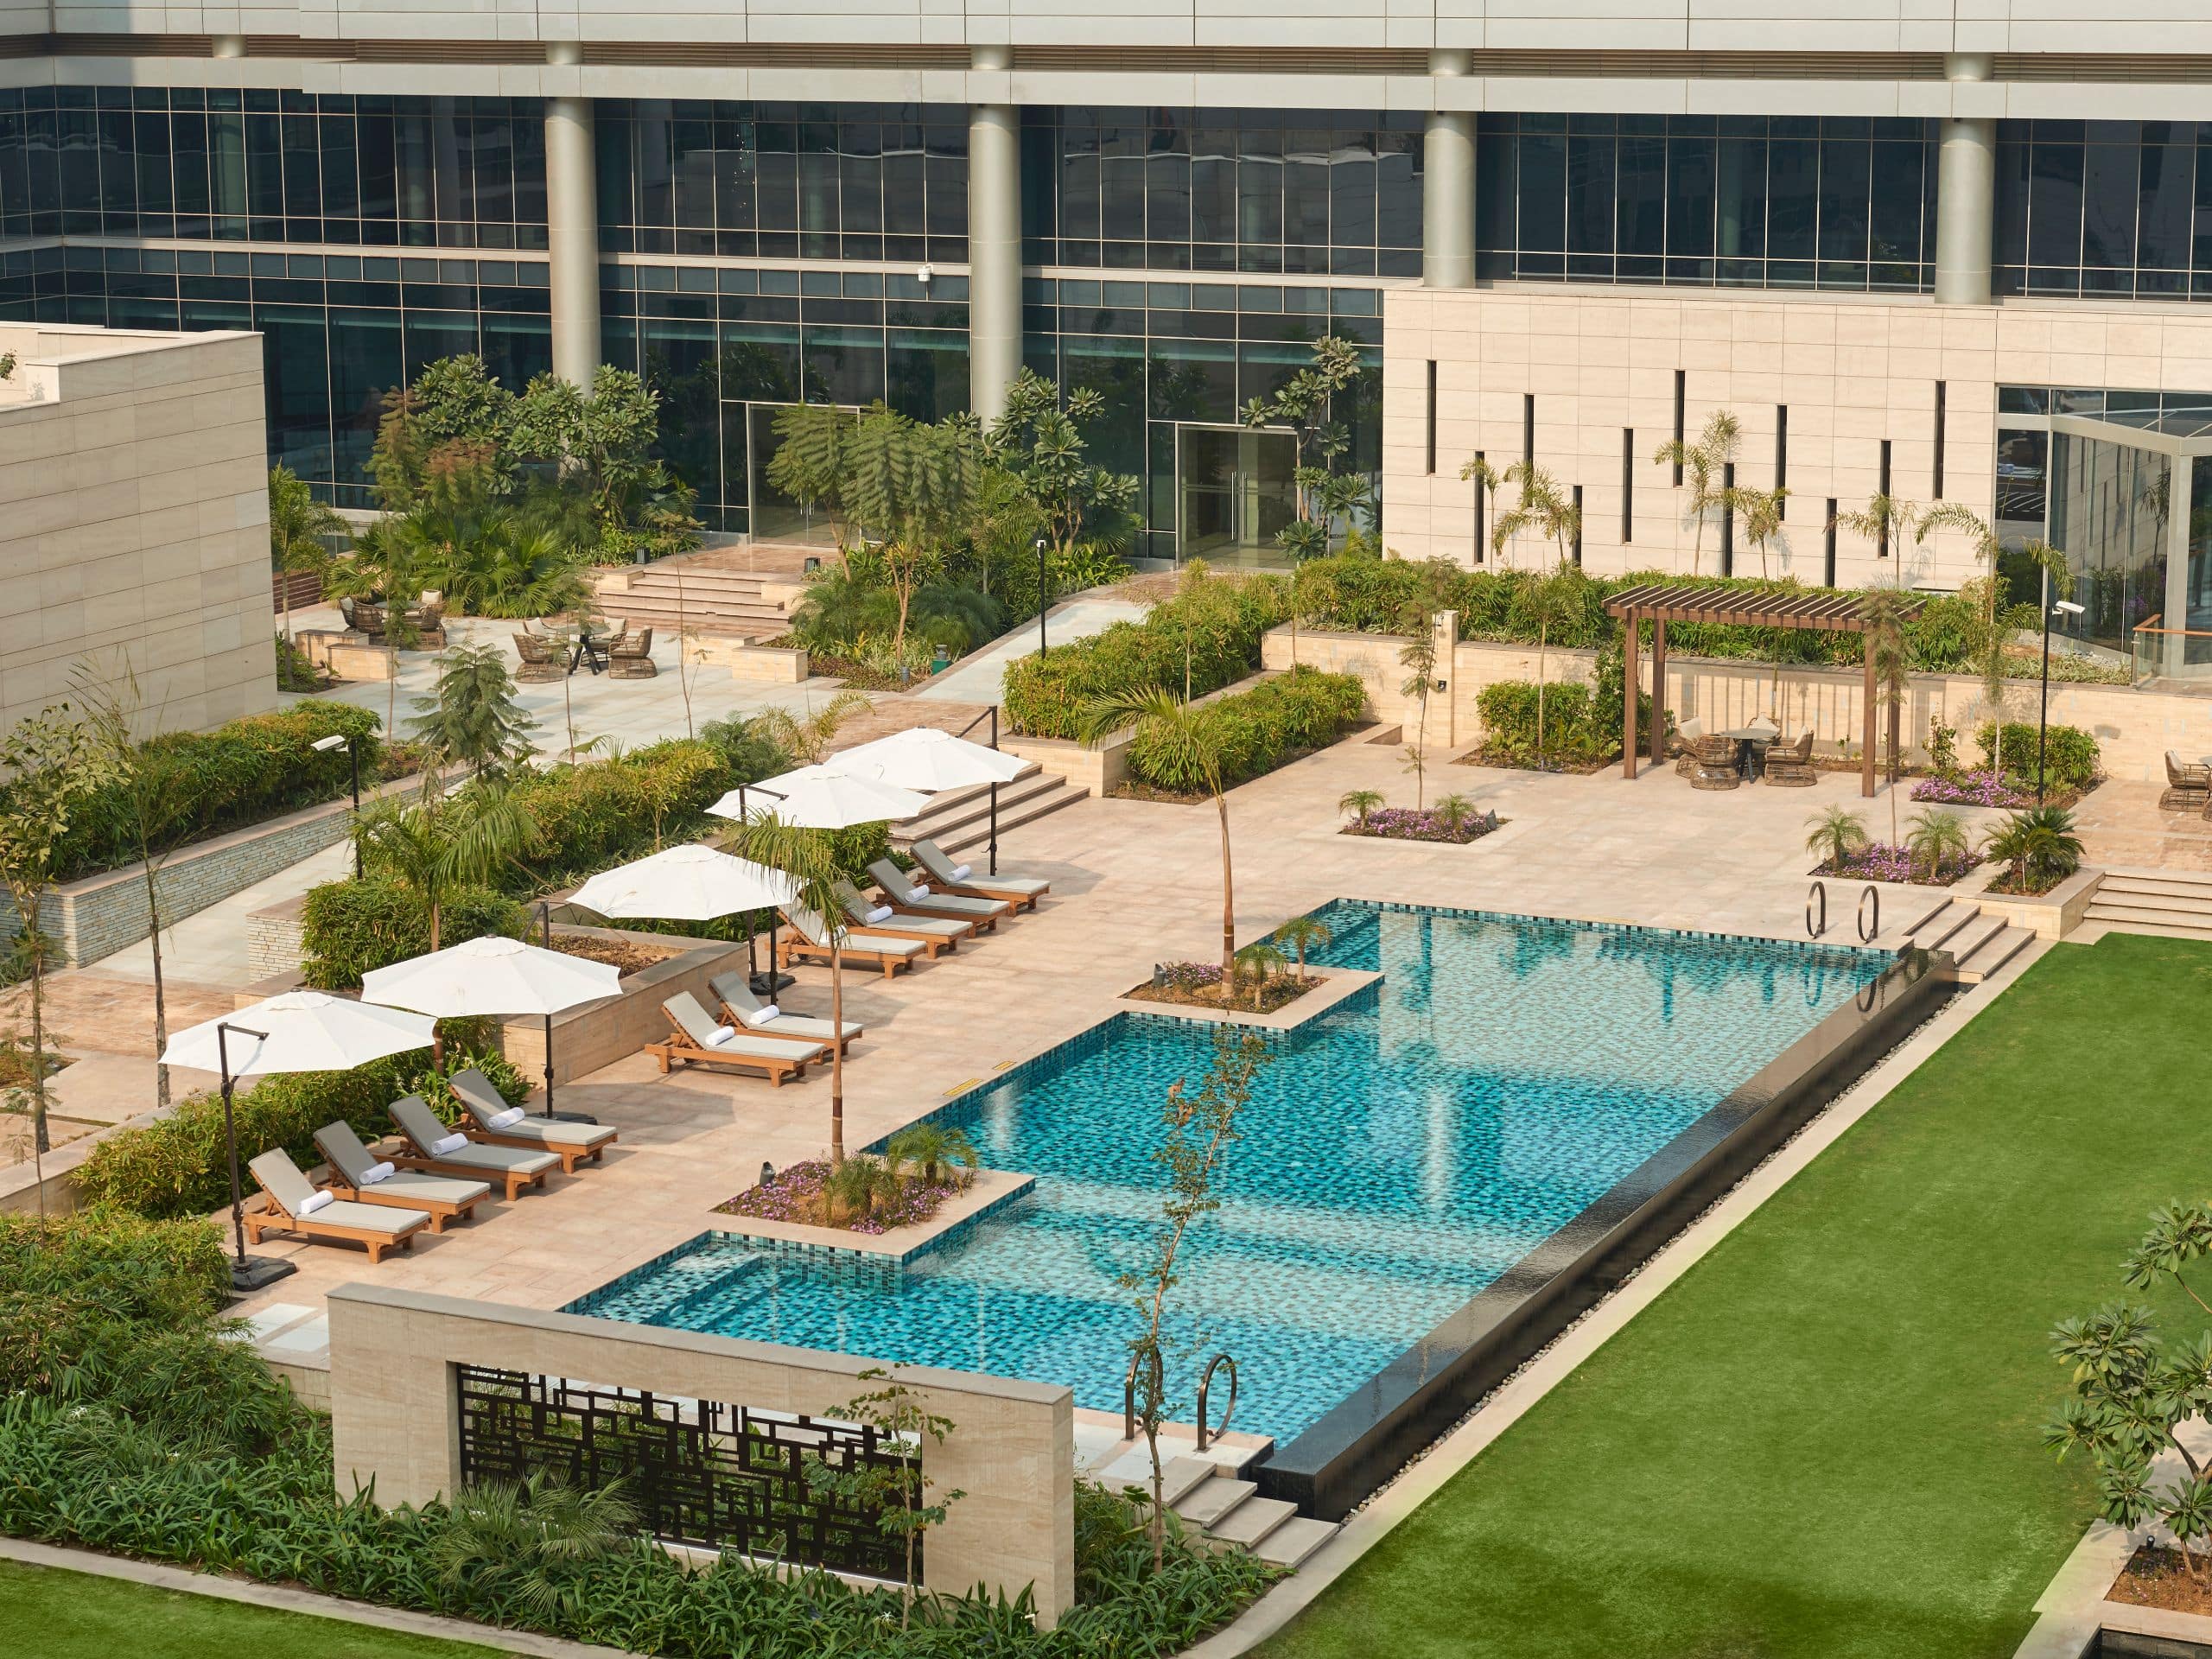 Top Hotels near DLF Promenade Mall, New Delhi and NCR for 2023